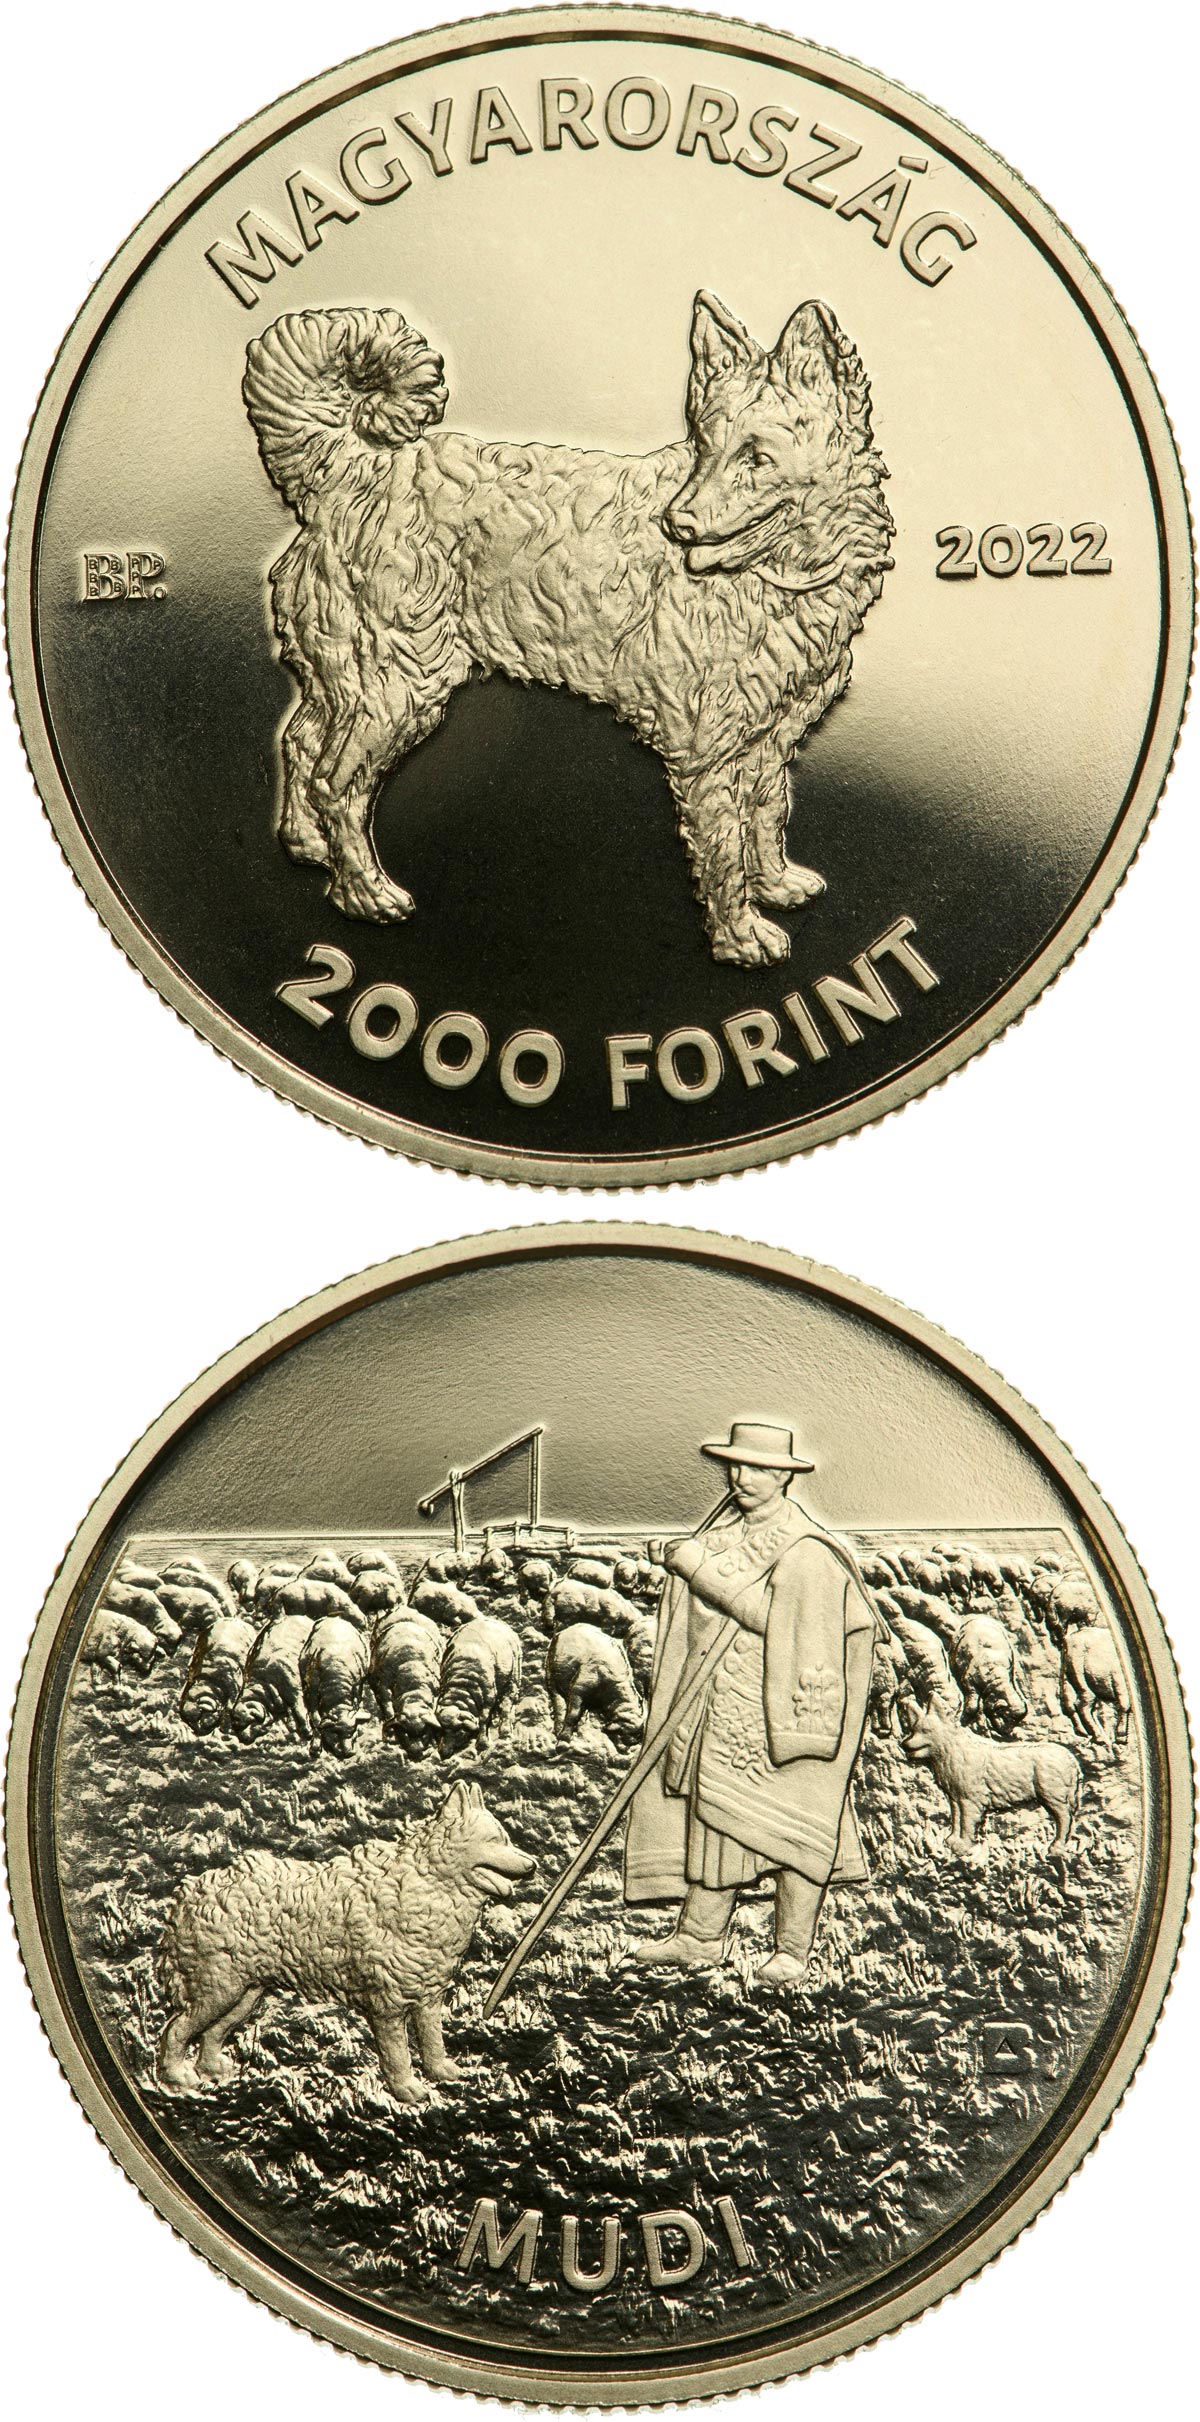 Image of 2000 forint coin - Mudi | Hungary 2022.  The Brass coin is of proof-like quality.